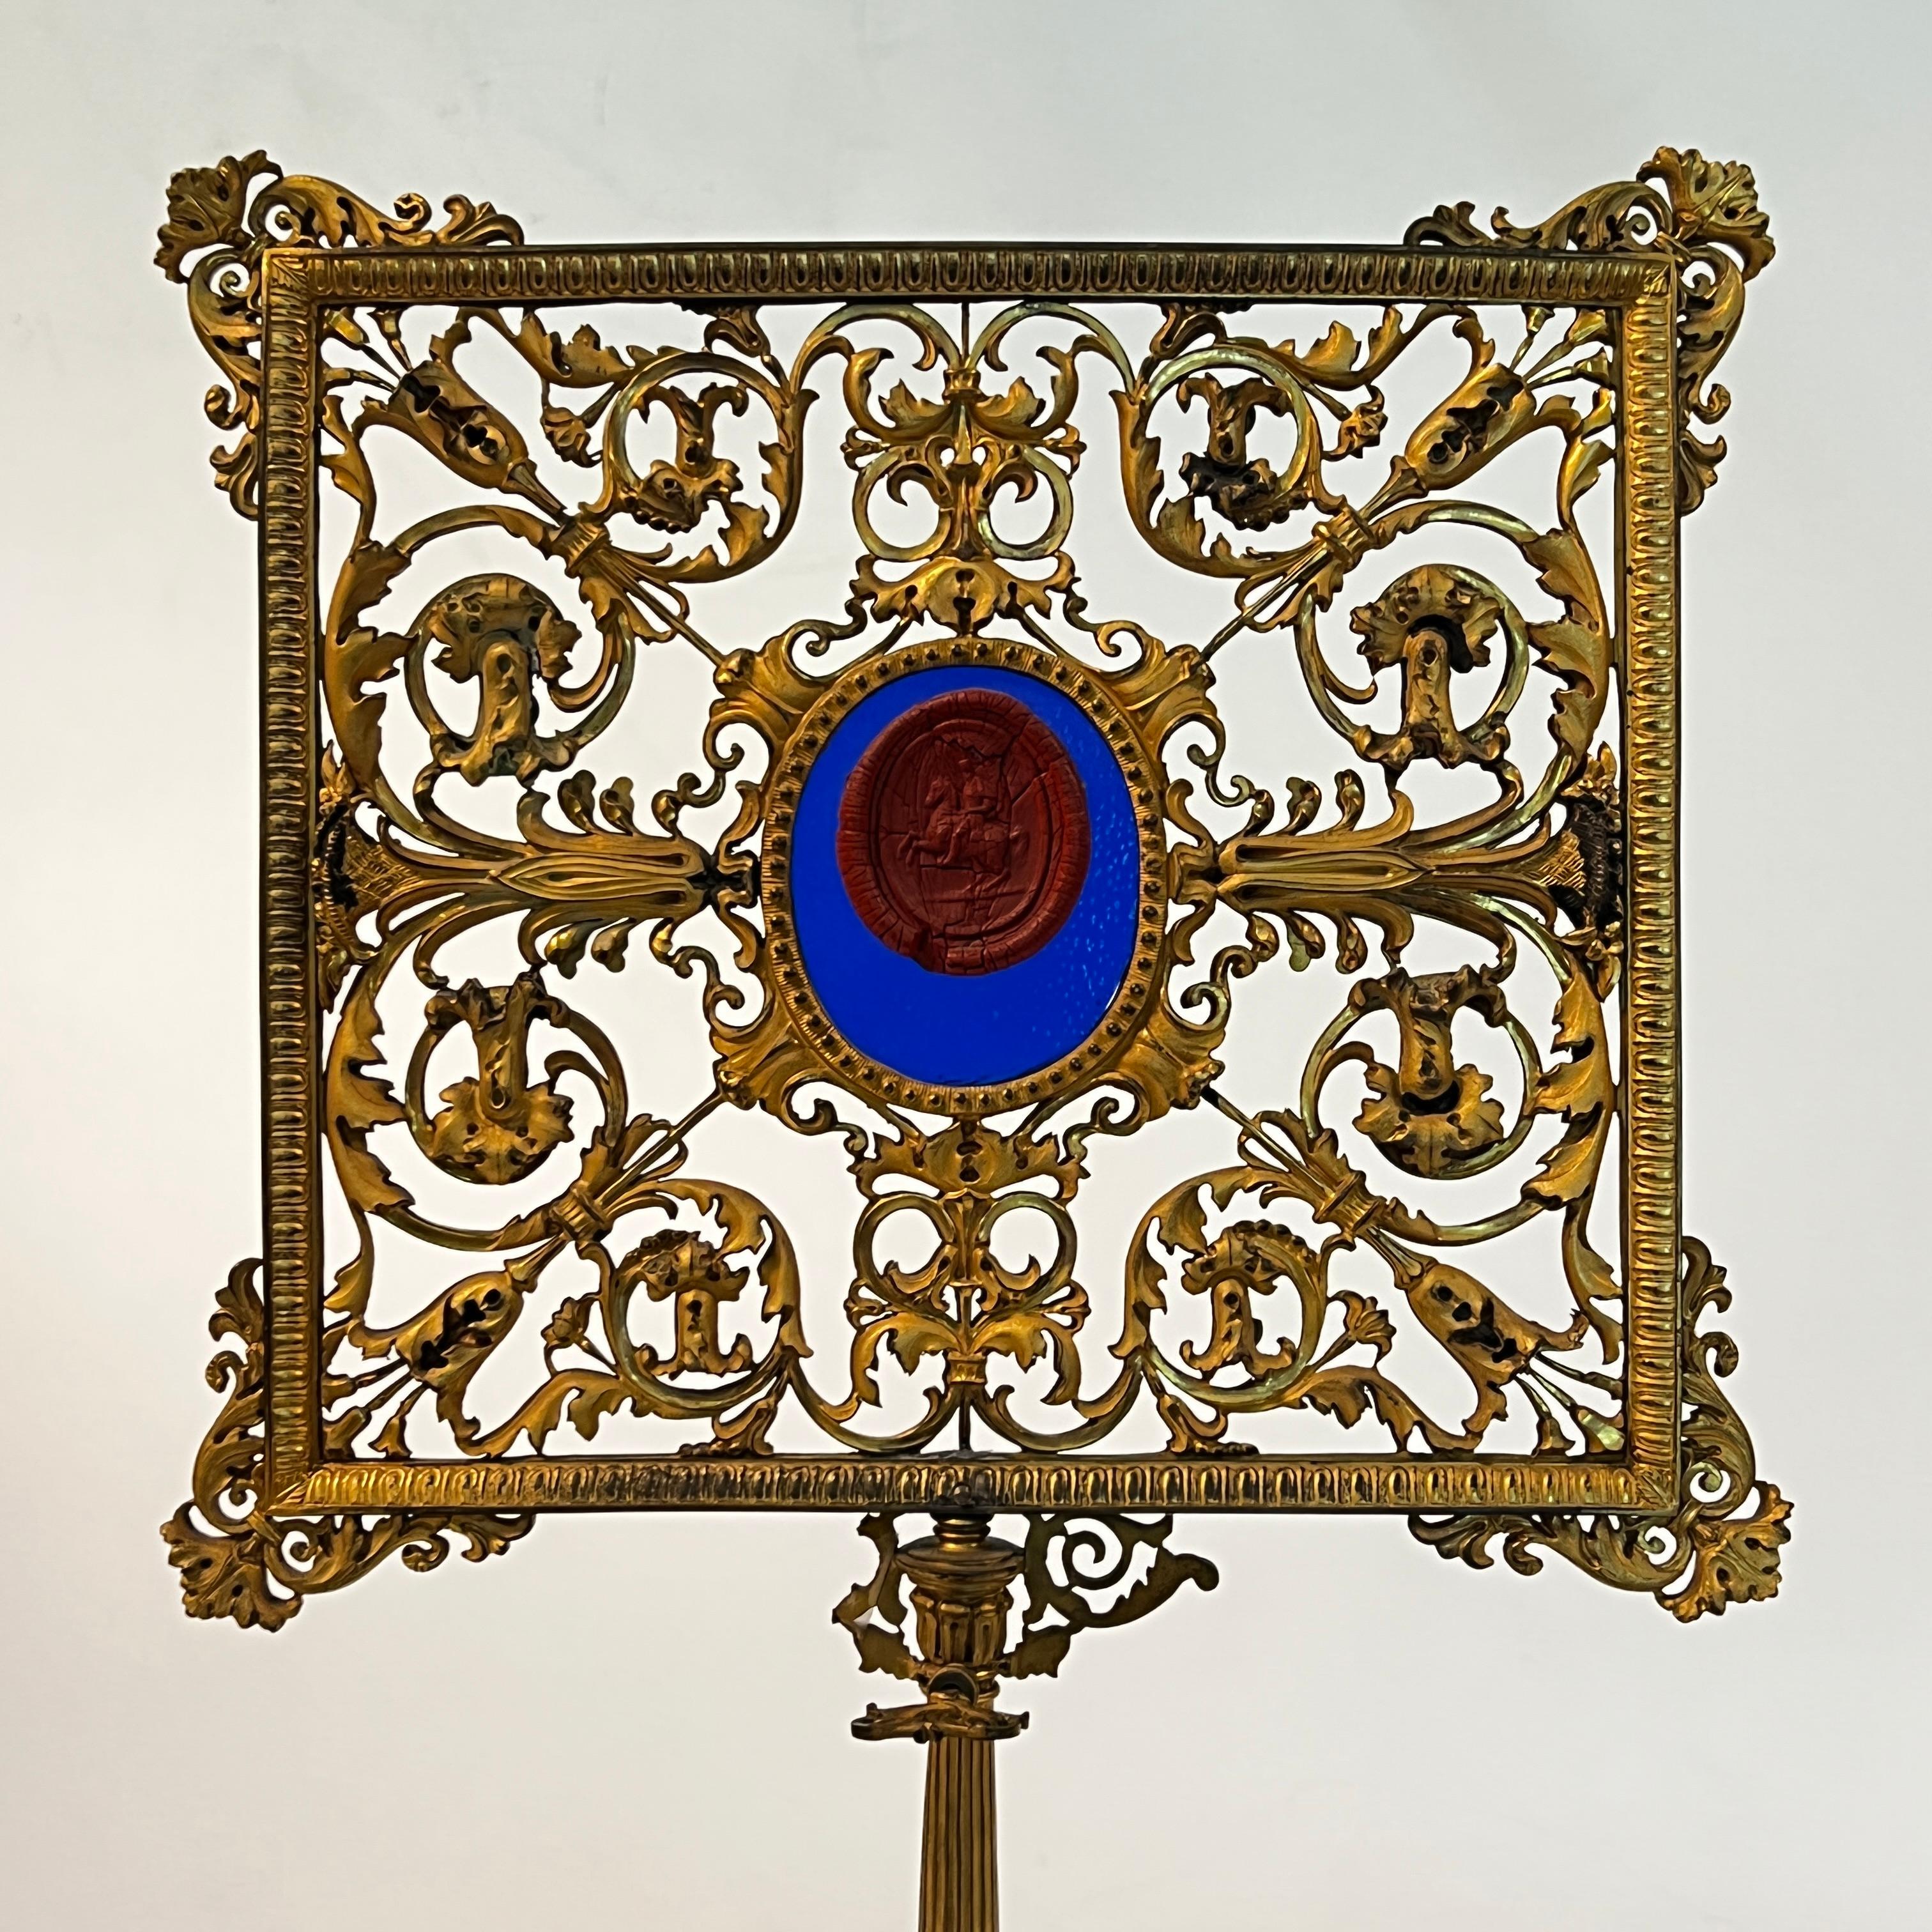 Our ormolu bronze table screen from the early 19th century is unique for its red wax seal depicting an officer on horseback, mounted to brilliant blue glass. Apparently unsigned and of French origin, based on the figure's tall cylindrical shako in